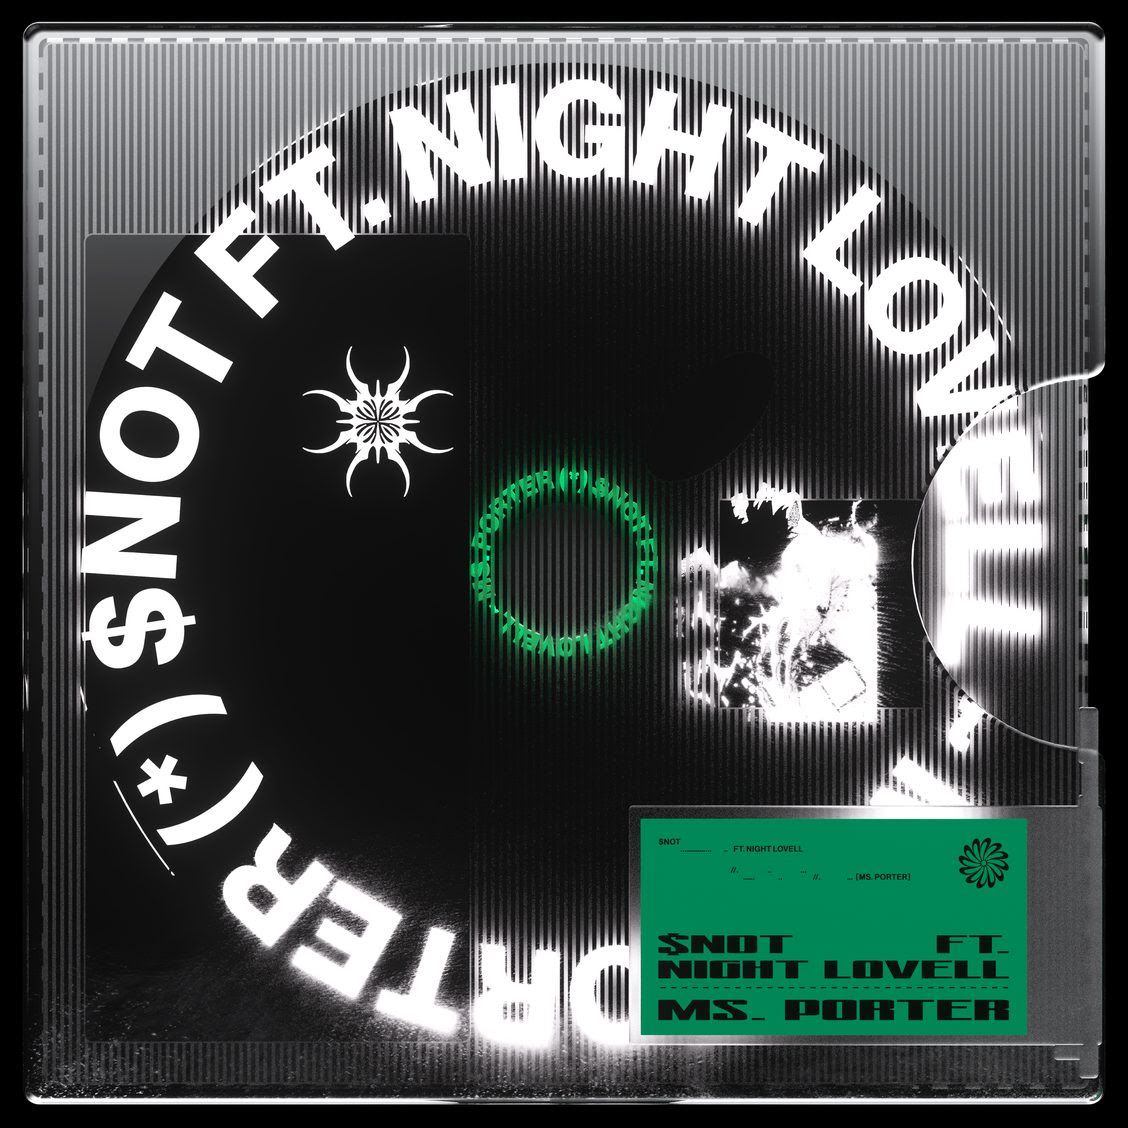 $NOT & Night Lovell Connect For “MS PORTER” Single